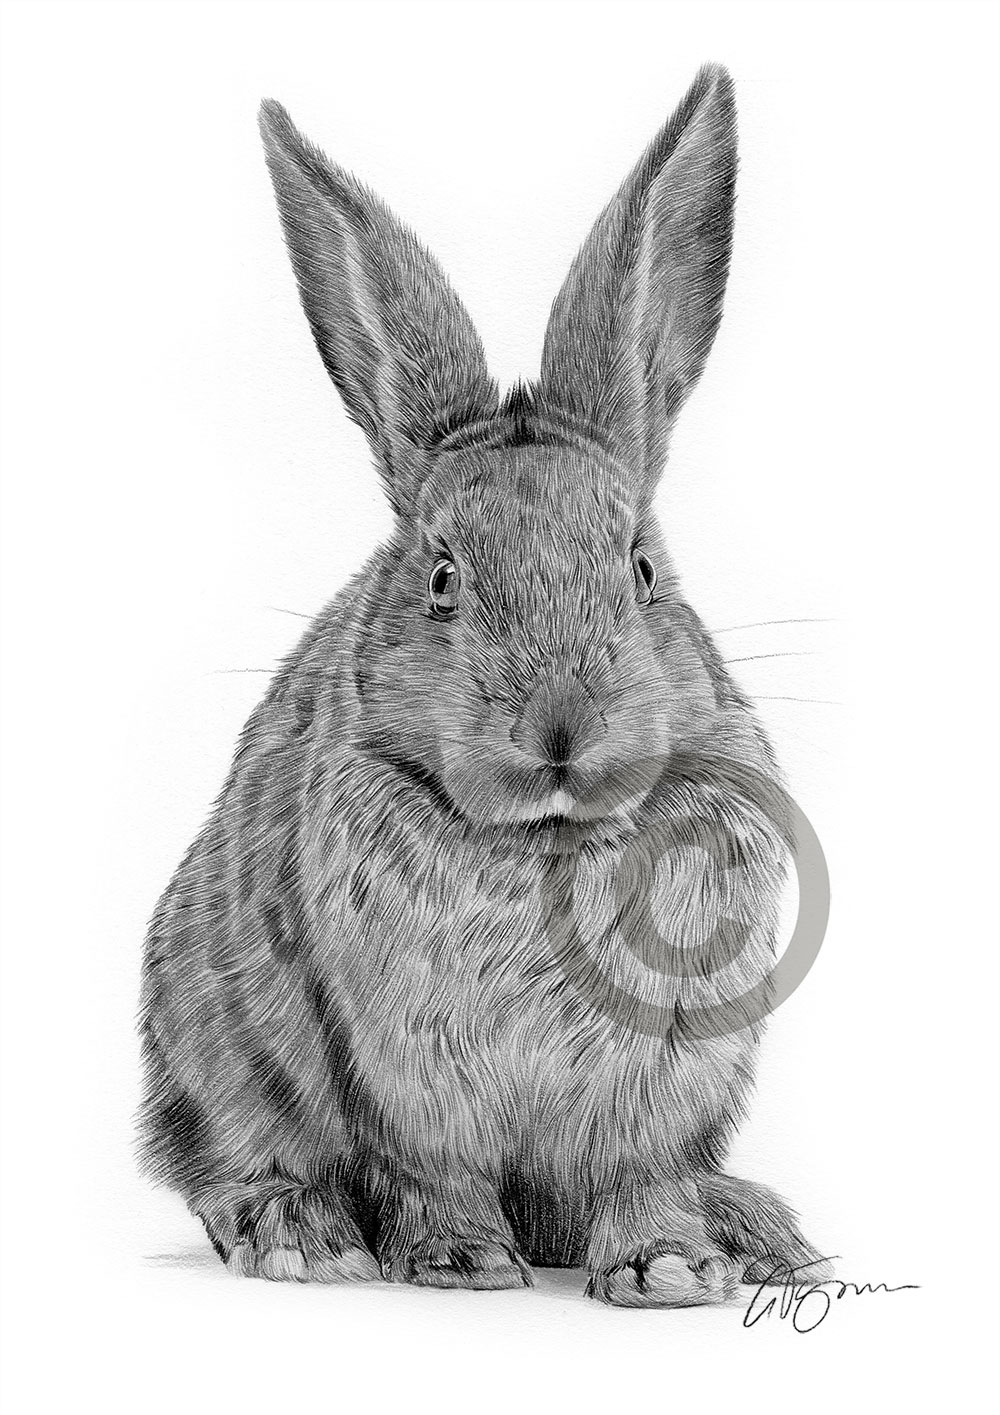 Pencil drawing of a young rabbit by artist Gary Tymon